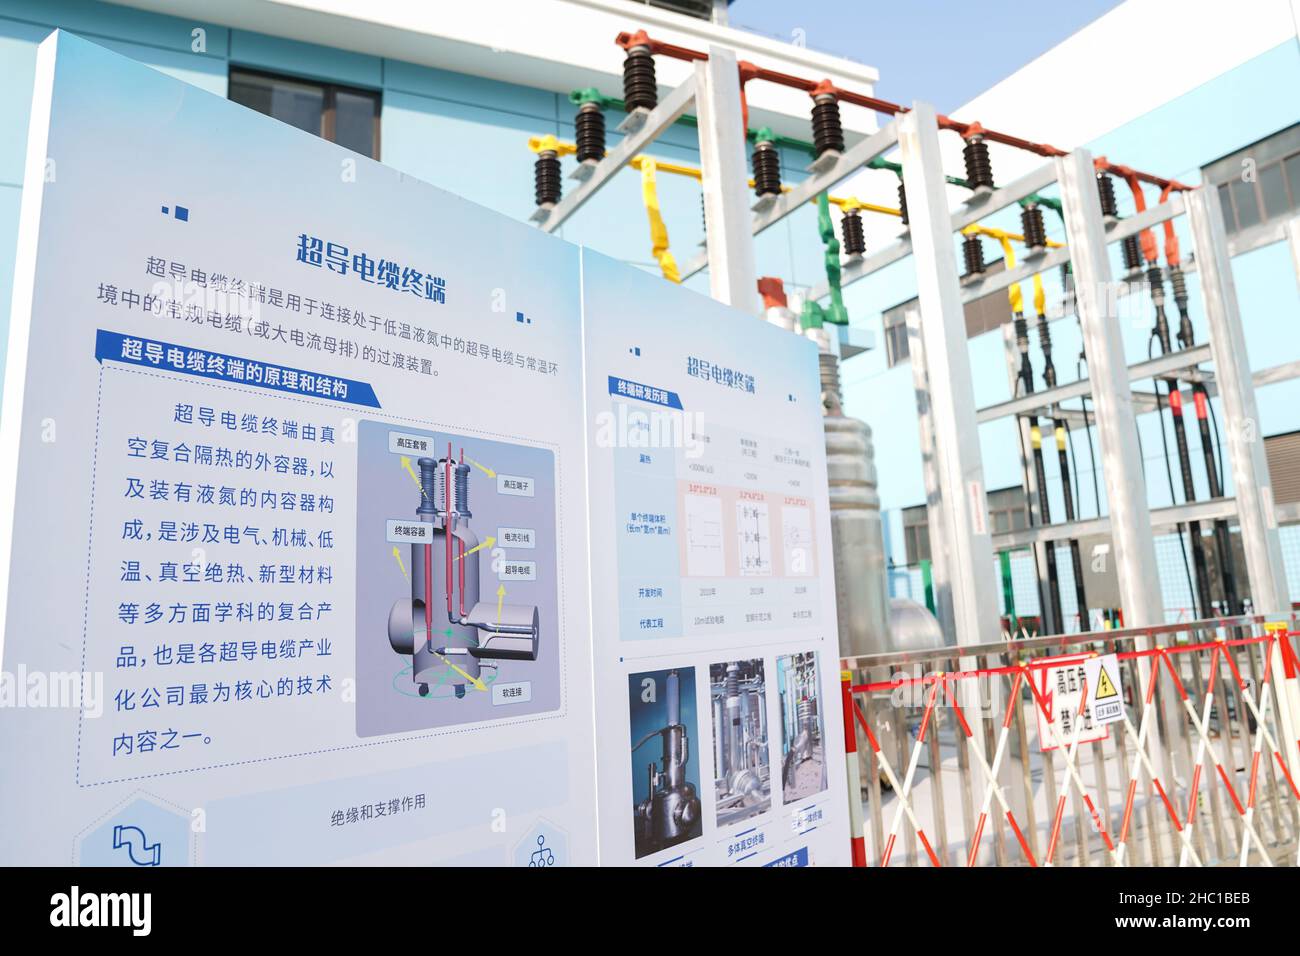 (211222) -- SHANGHAI, Dec. 22, 2021 (Xinhua) -- Photo shows the cable terminal of the high-capacity superconducting power line in east China's Shanghai, Dec. 22, 2021. A high-capacity superconducting power line was put into operation in Shanghai on Wednesday, according to the Shanghai branch of the State Grid. Installed in the commercial area of Xuhui District, the 1.2-km cable connects two 220 kV substations with a designed current capacity of 2,200 amps. This is the first superconducting transmission project built by State Grid in China, according to State Grid Shanghai Municipal Electr Stock Photo